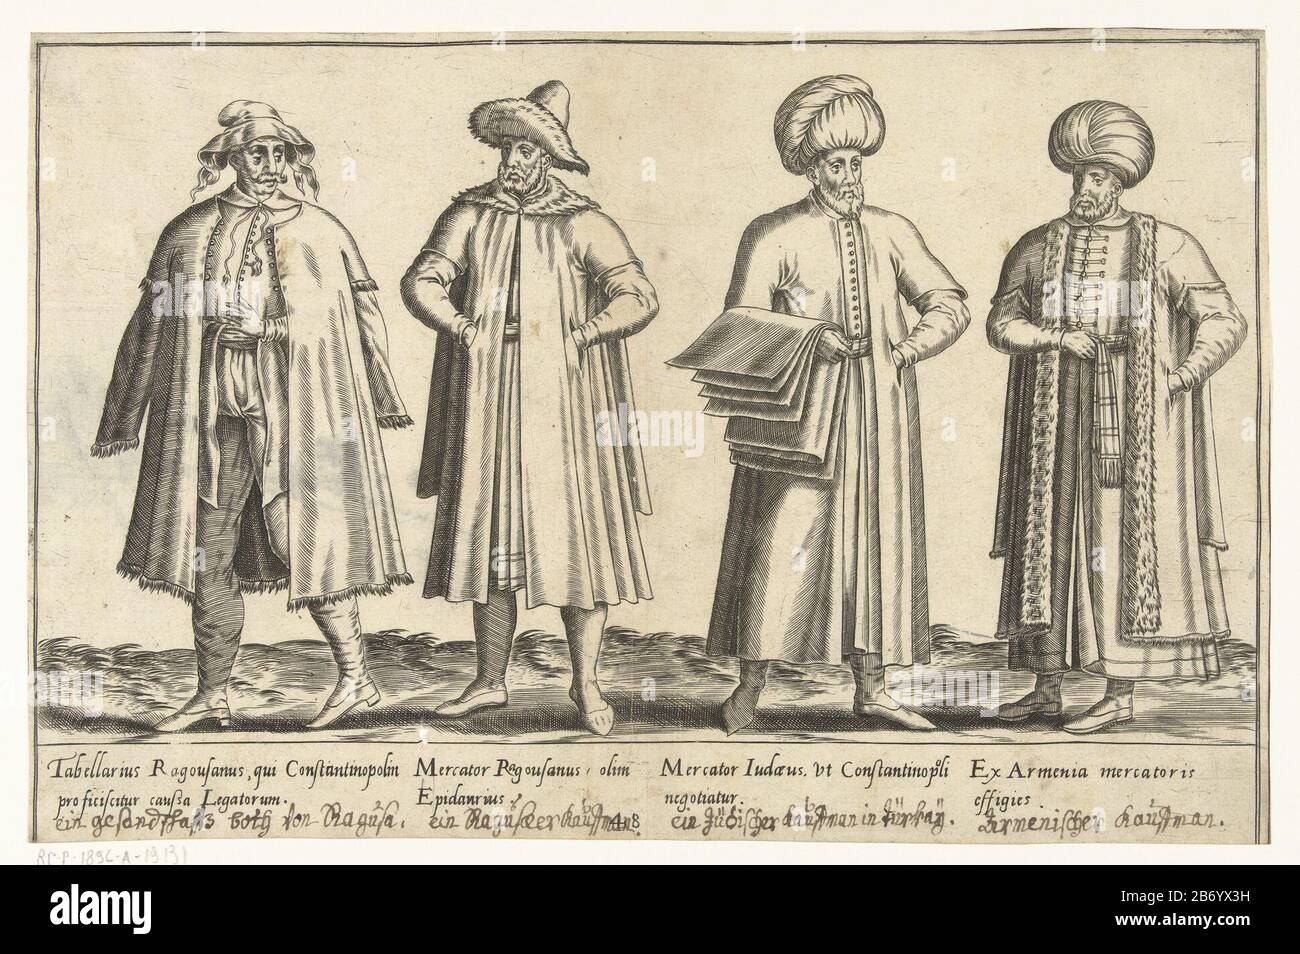 Kleding van handelaren in Constantinopel rond 1580 Traditionele kleding van  over de hele wereld rond 1580 (serietitel) Print out a book on  sixteenth-century clothing around 1580. Four male traders from  Constantinople. All